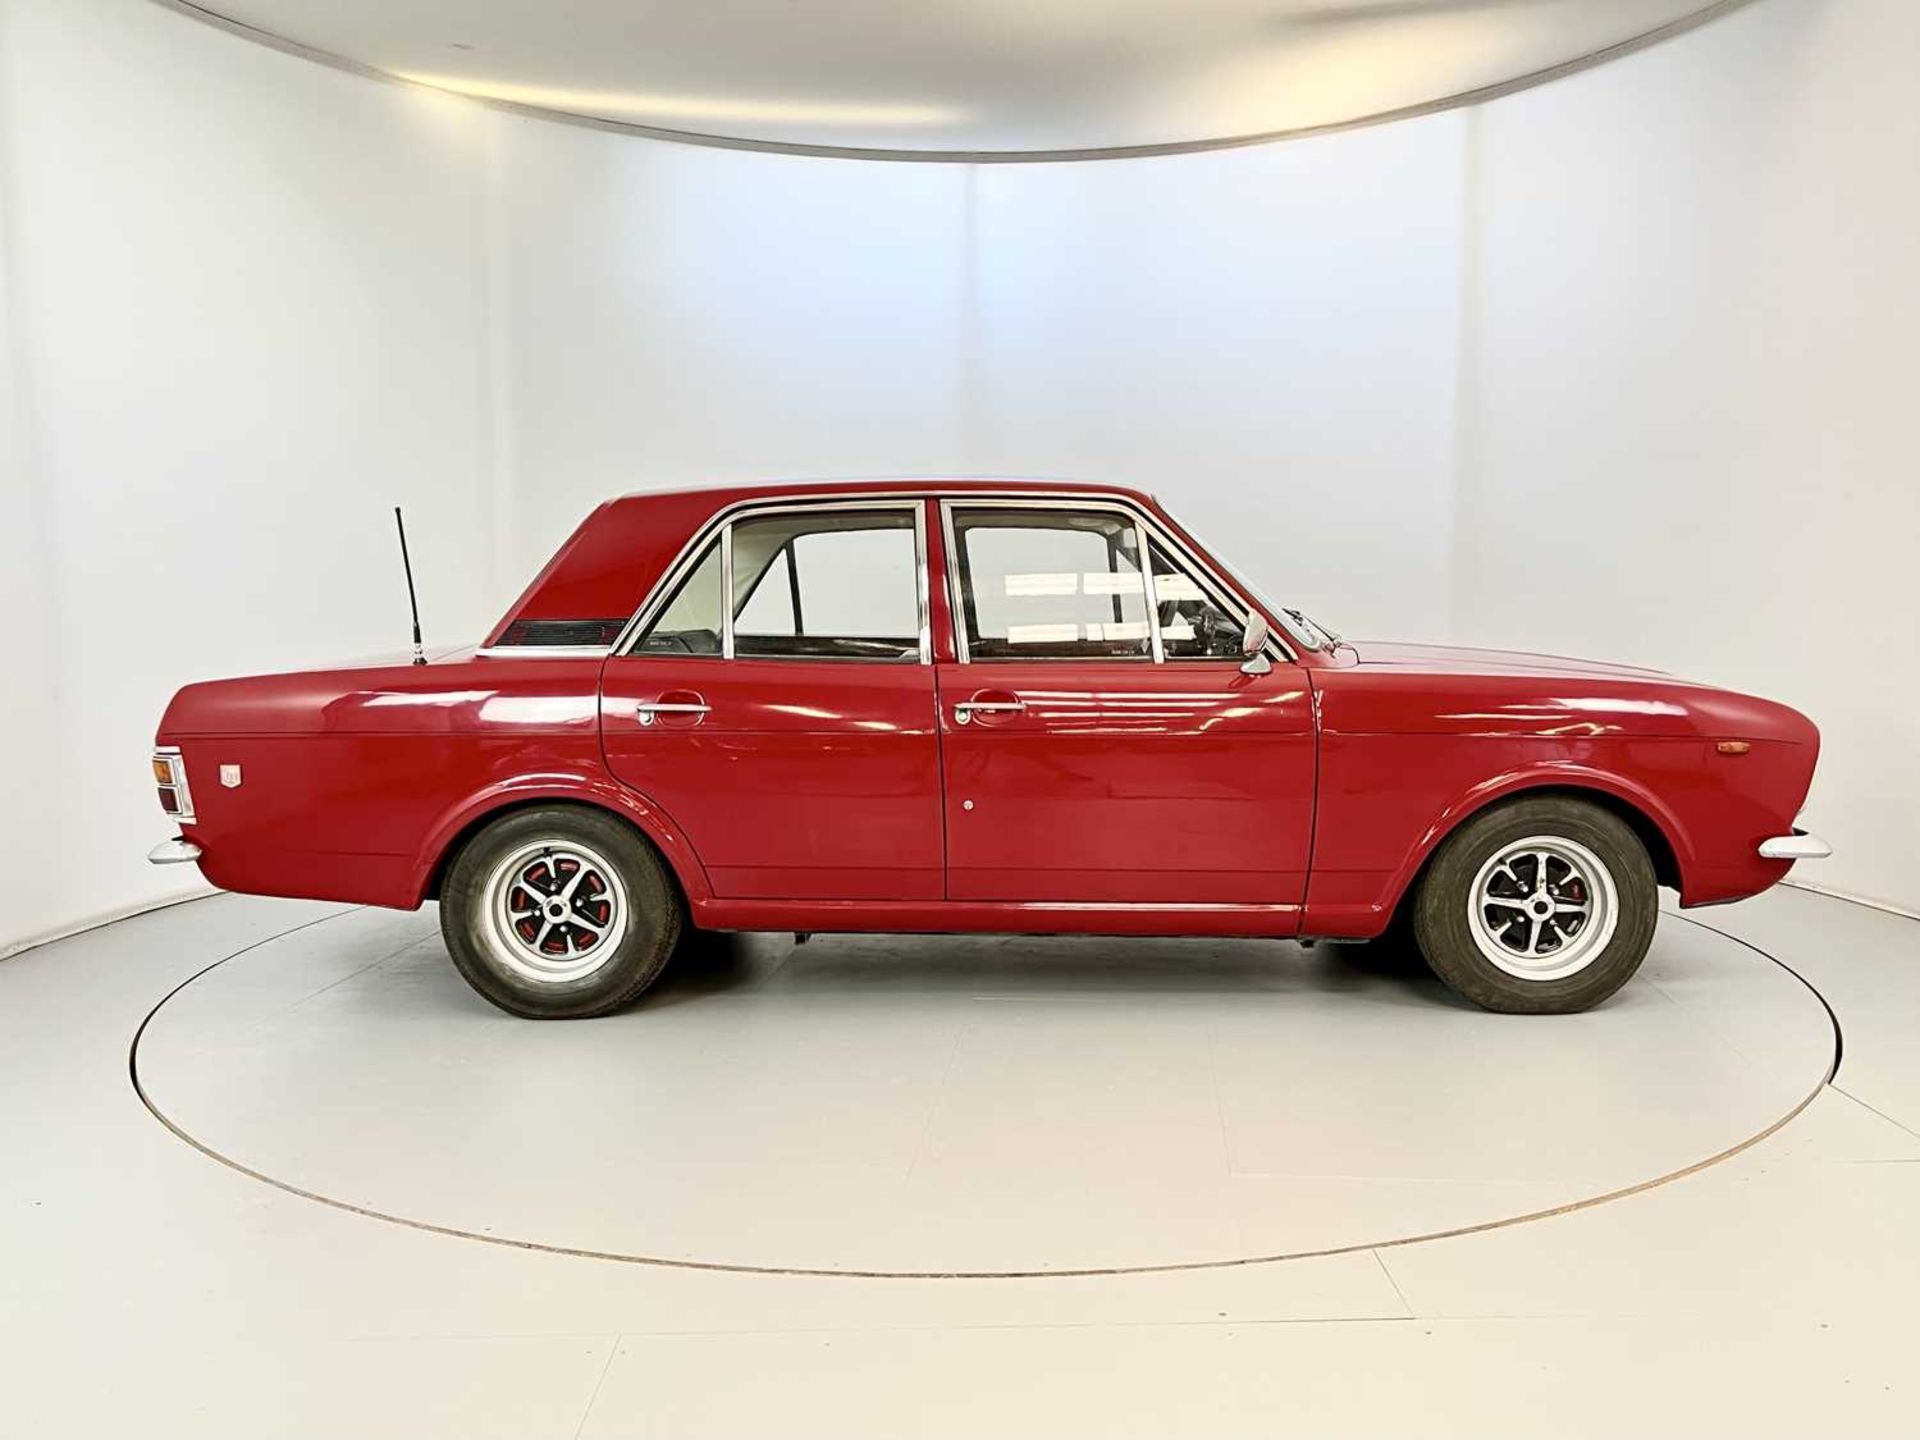 1967 Ford Cortina 1600GT - Image 11 of 37